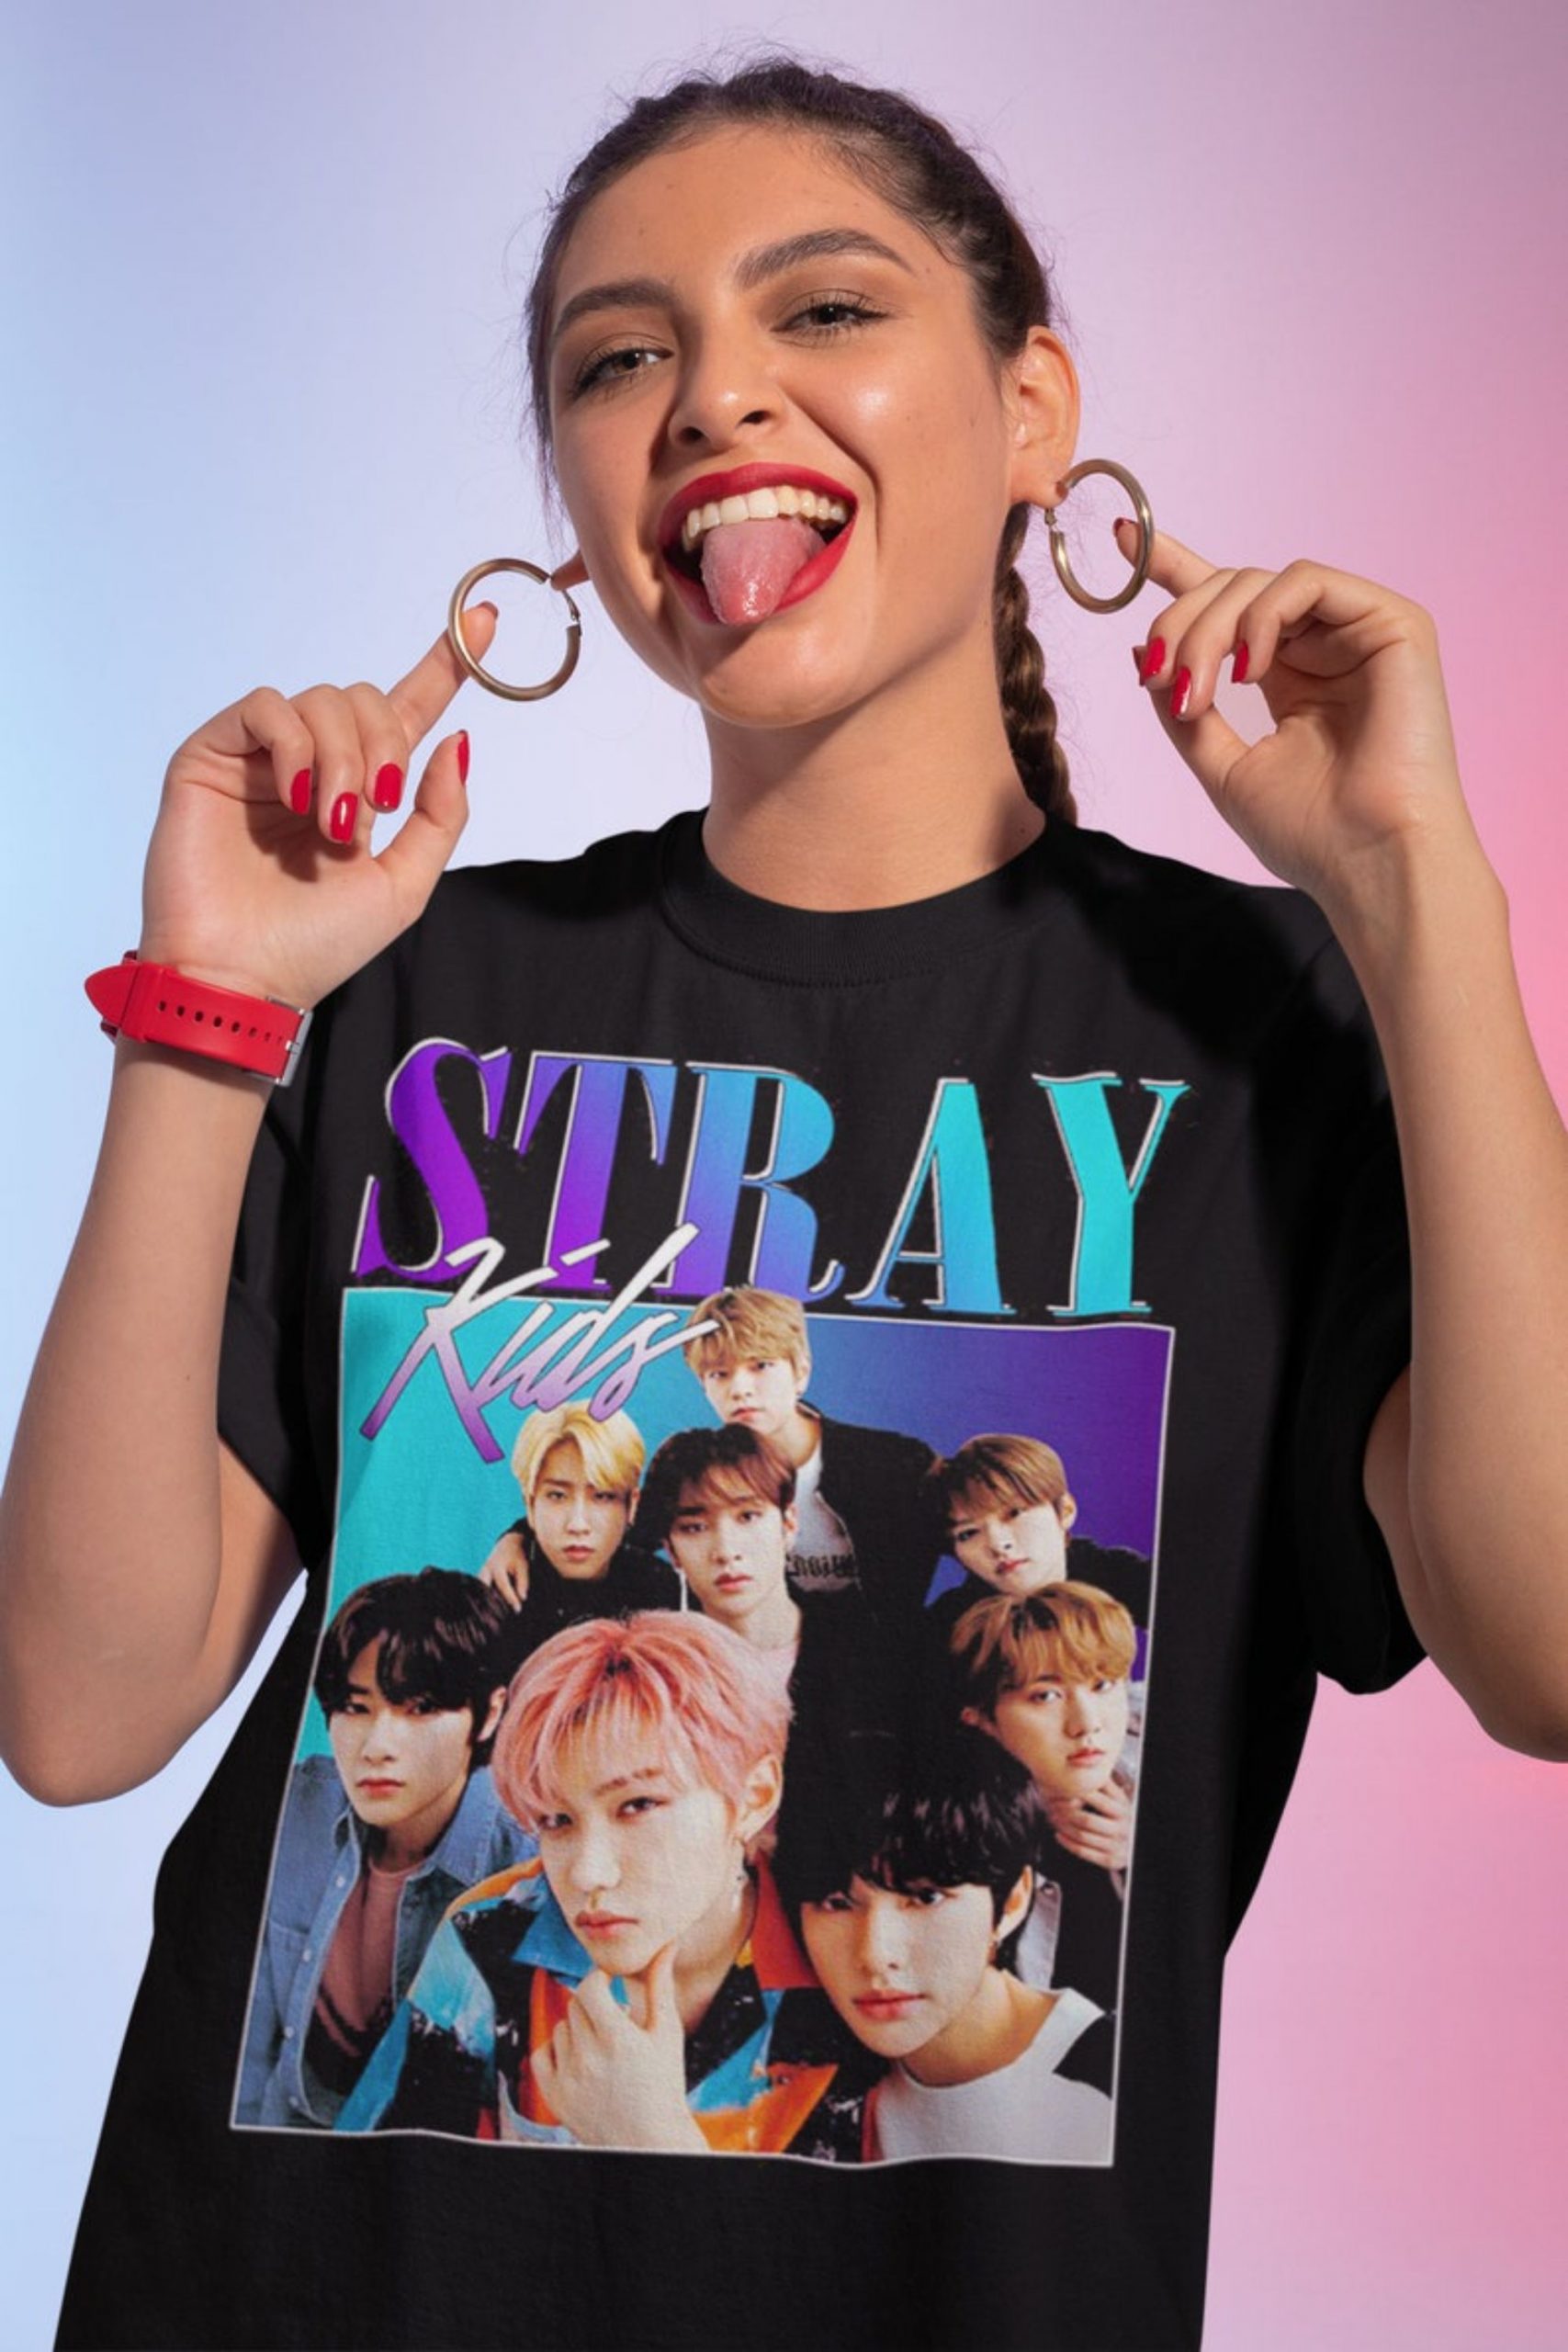 Shop the Latest Stray Kids Gear and Merchandise